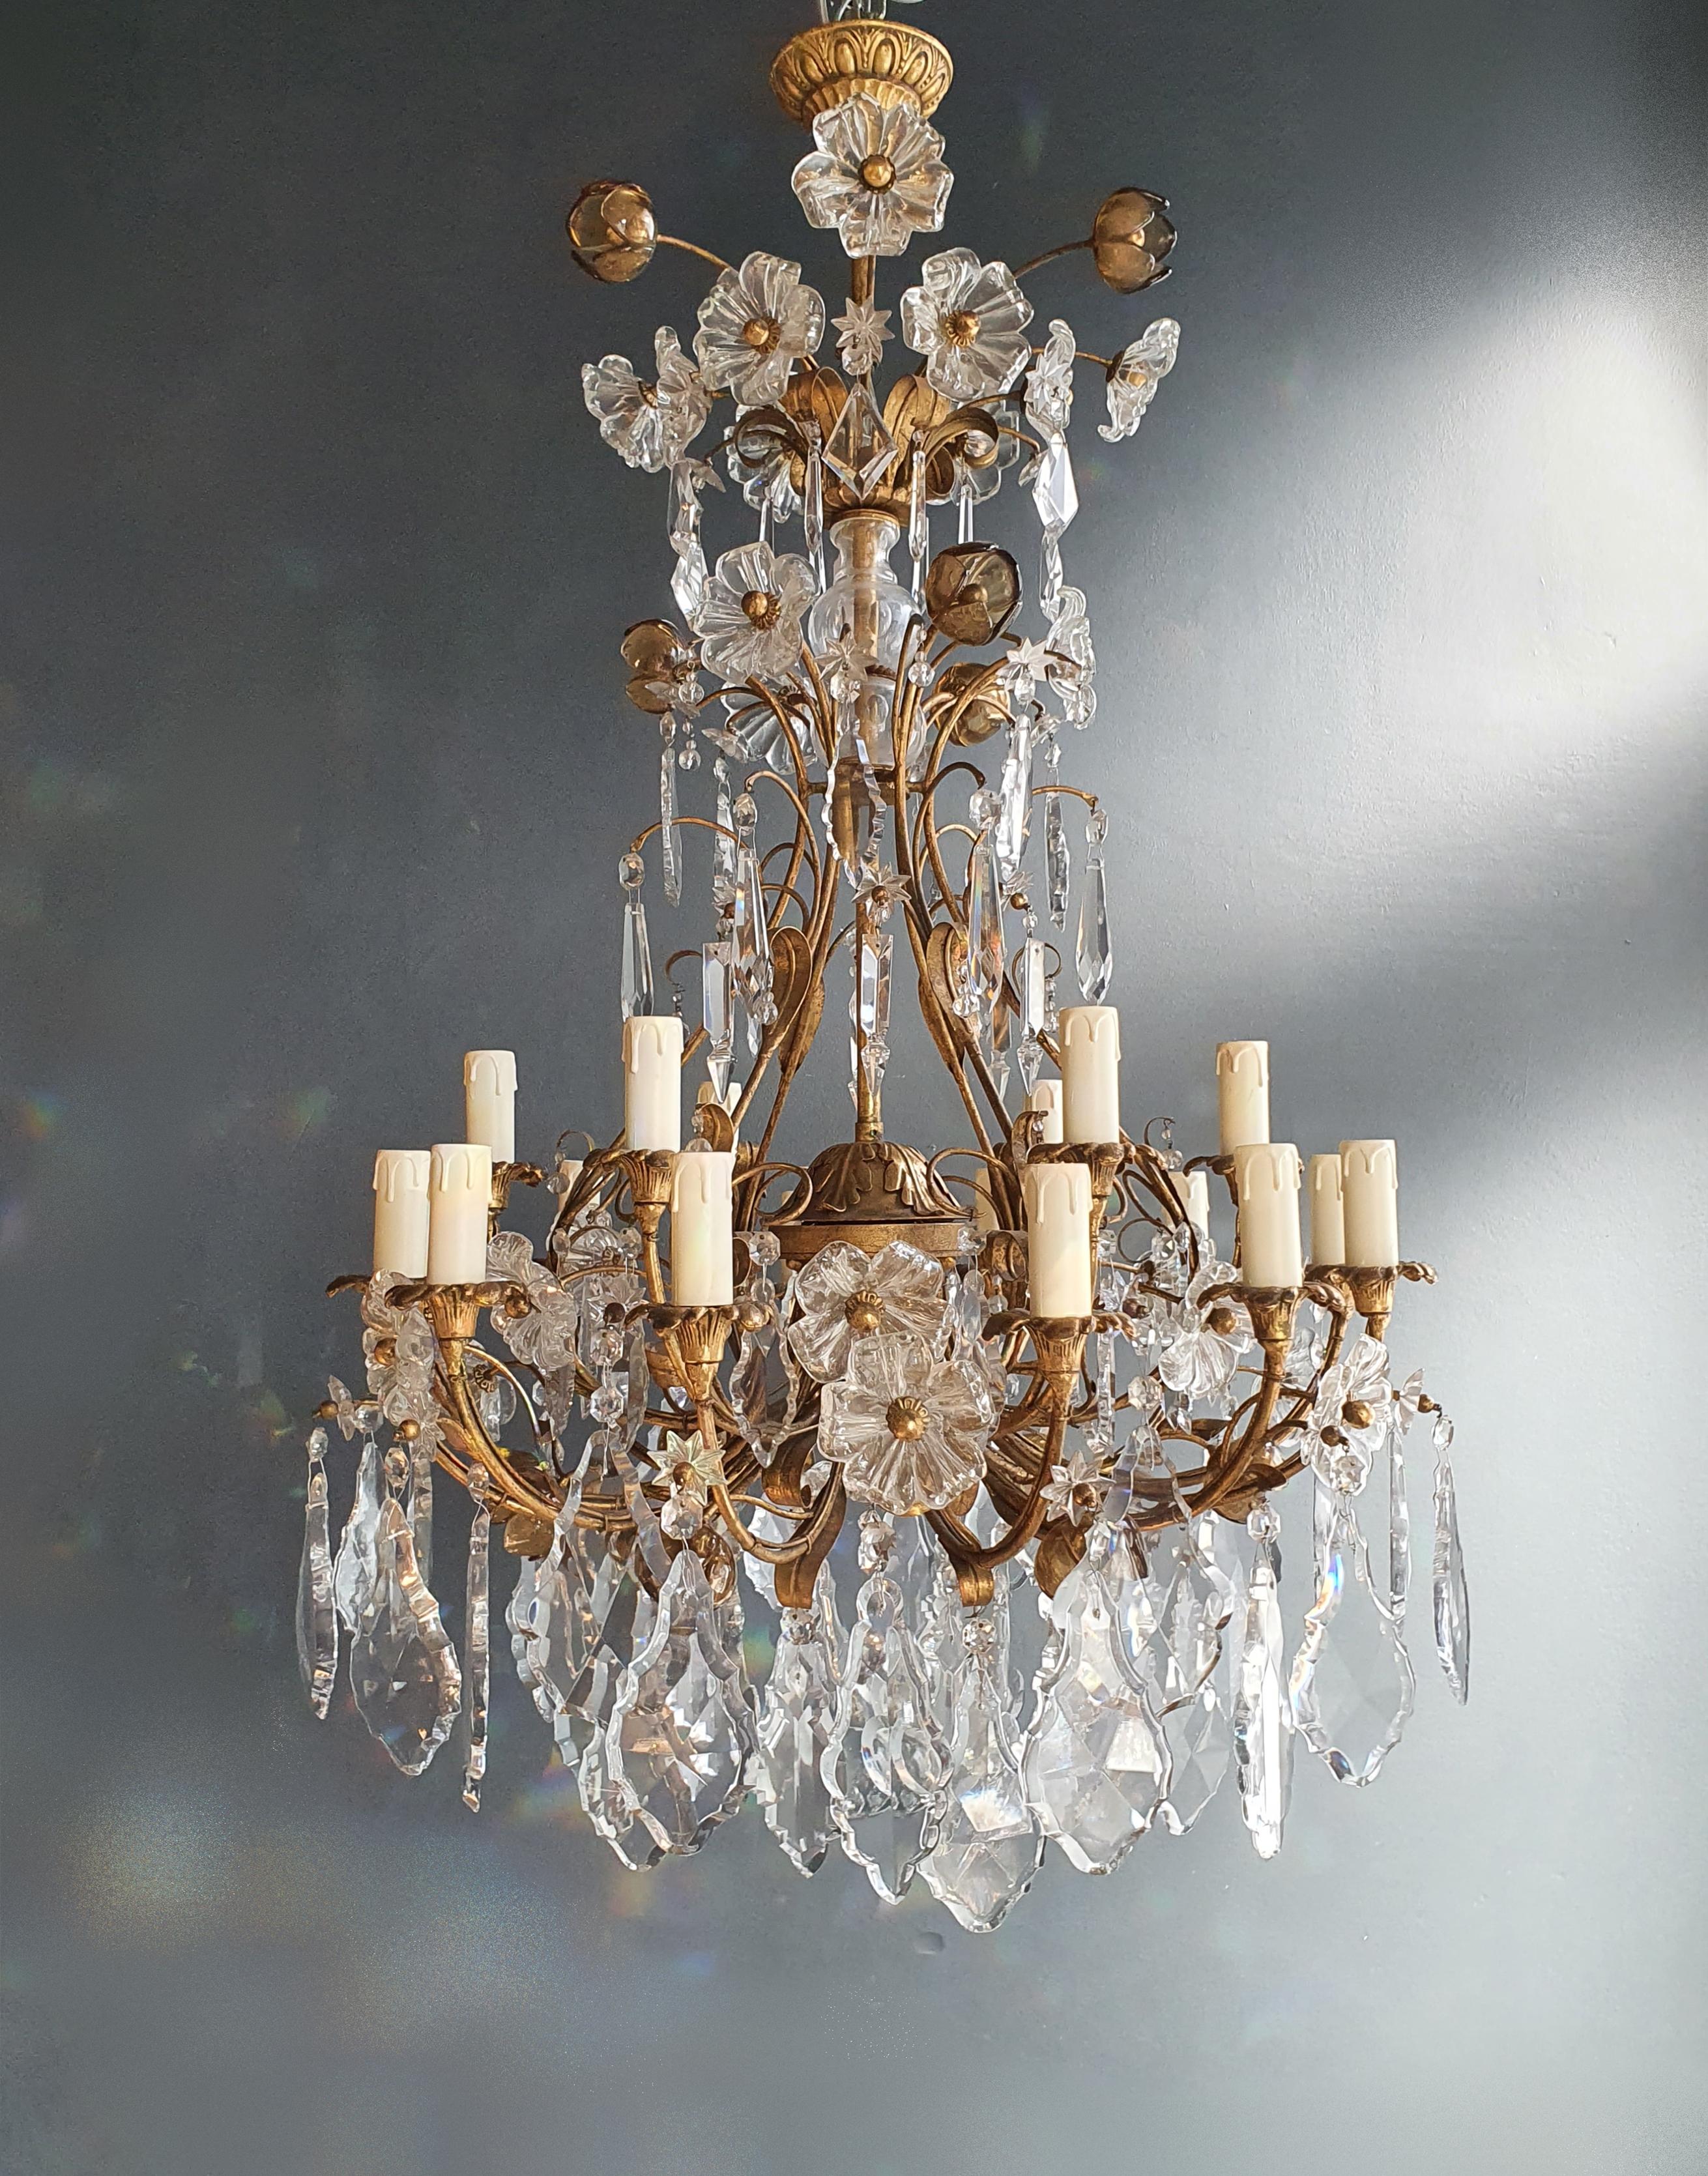 Exquisite Antique Crystal Chandeliers: Where Murano Craftsmanship Meets Art Nouveau Splendor

Immerse yourself in the enchantment of yesteryears with these exquisite Murano crystal chandeliers, a fusion of elegance and Art Nouveau opulence.